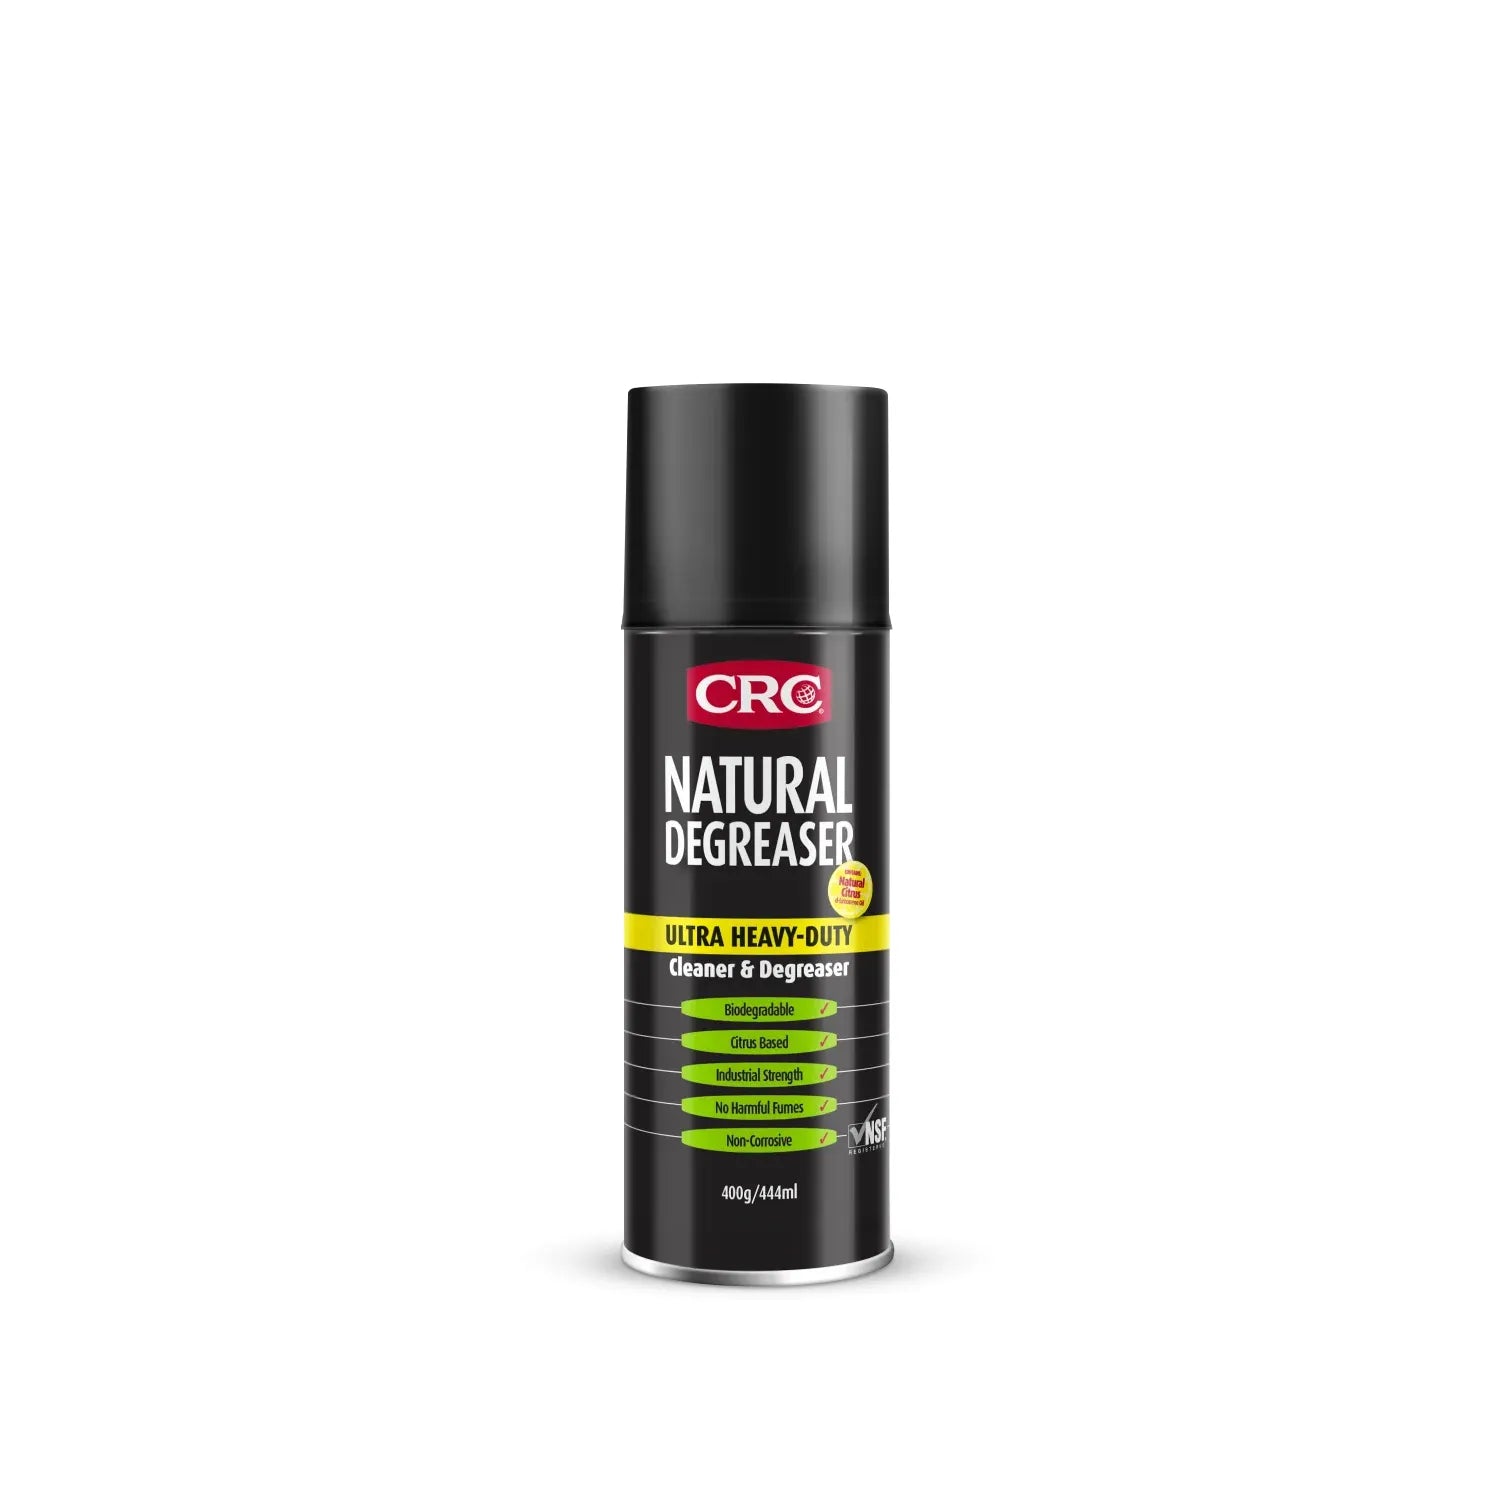 CRC Natural Degreaser 400g | Product Code : 3076 - South East Clearance Centre